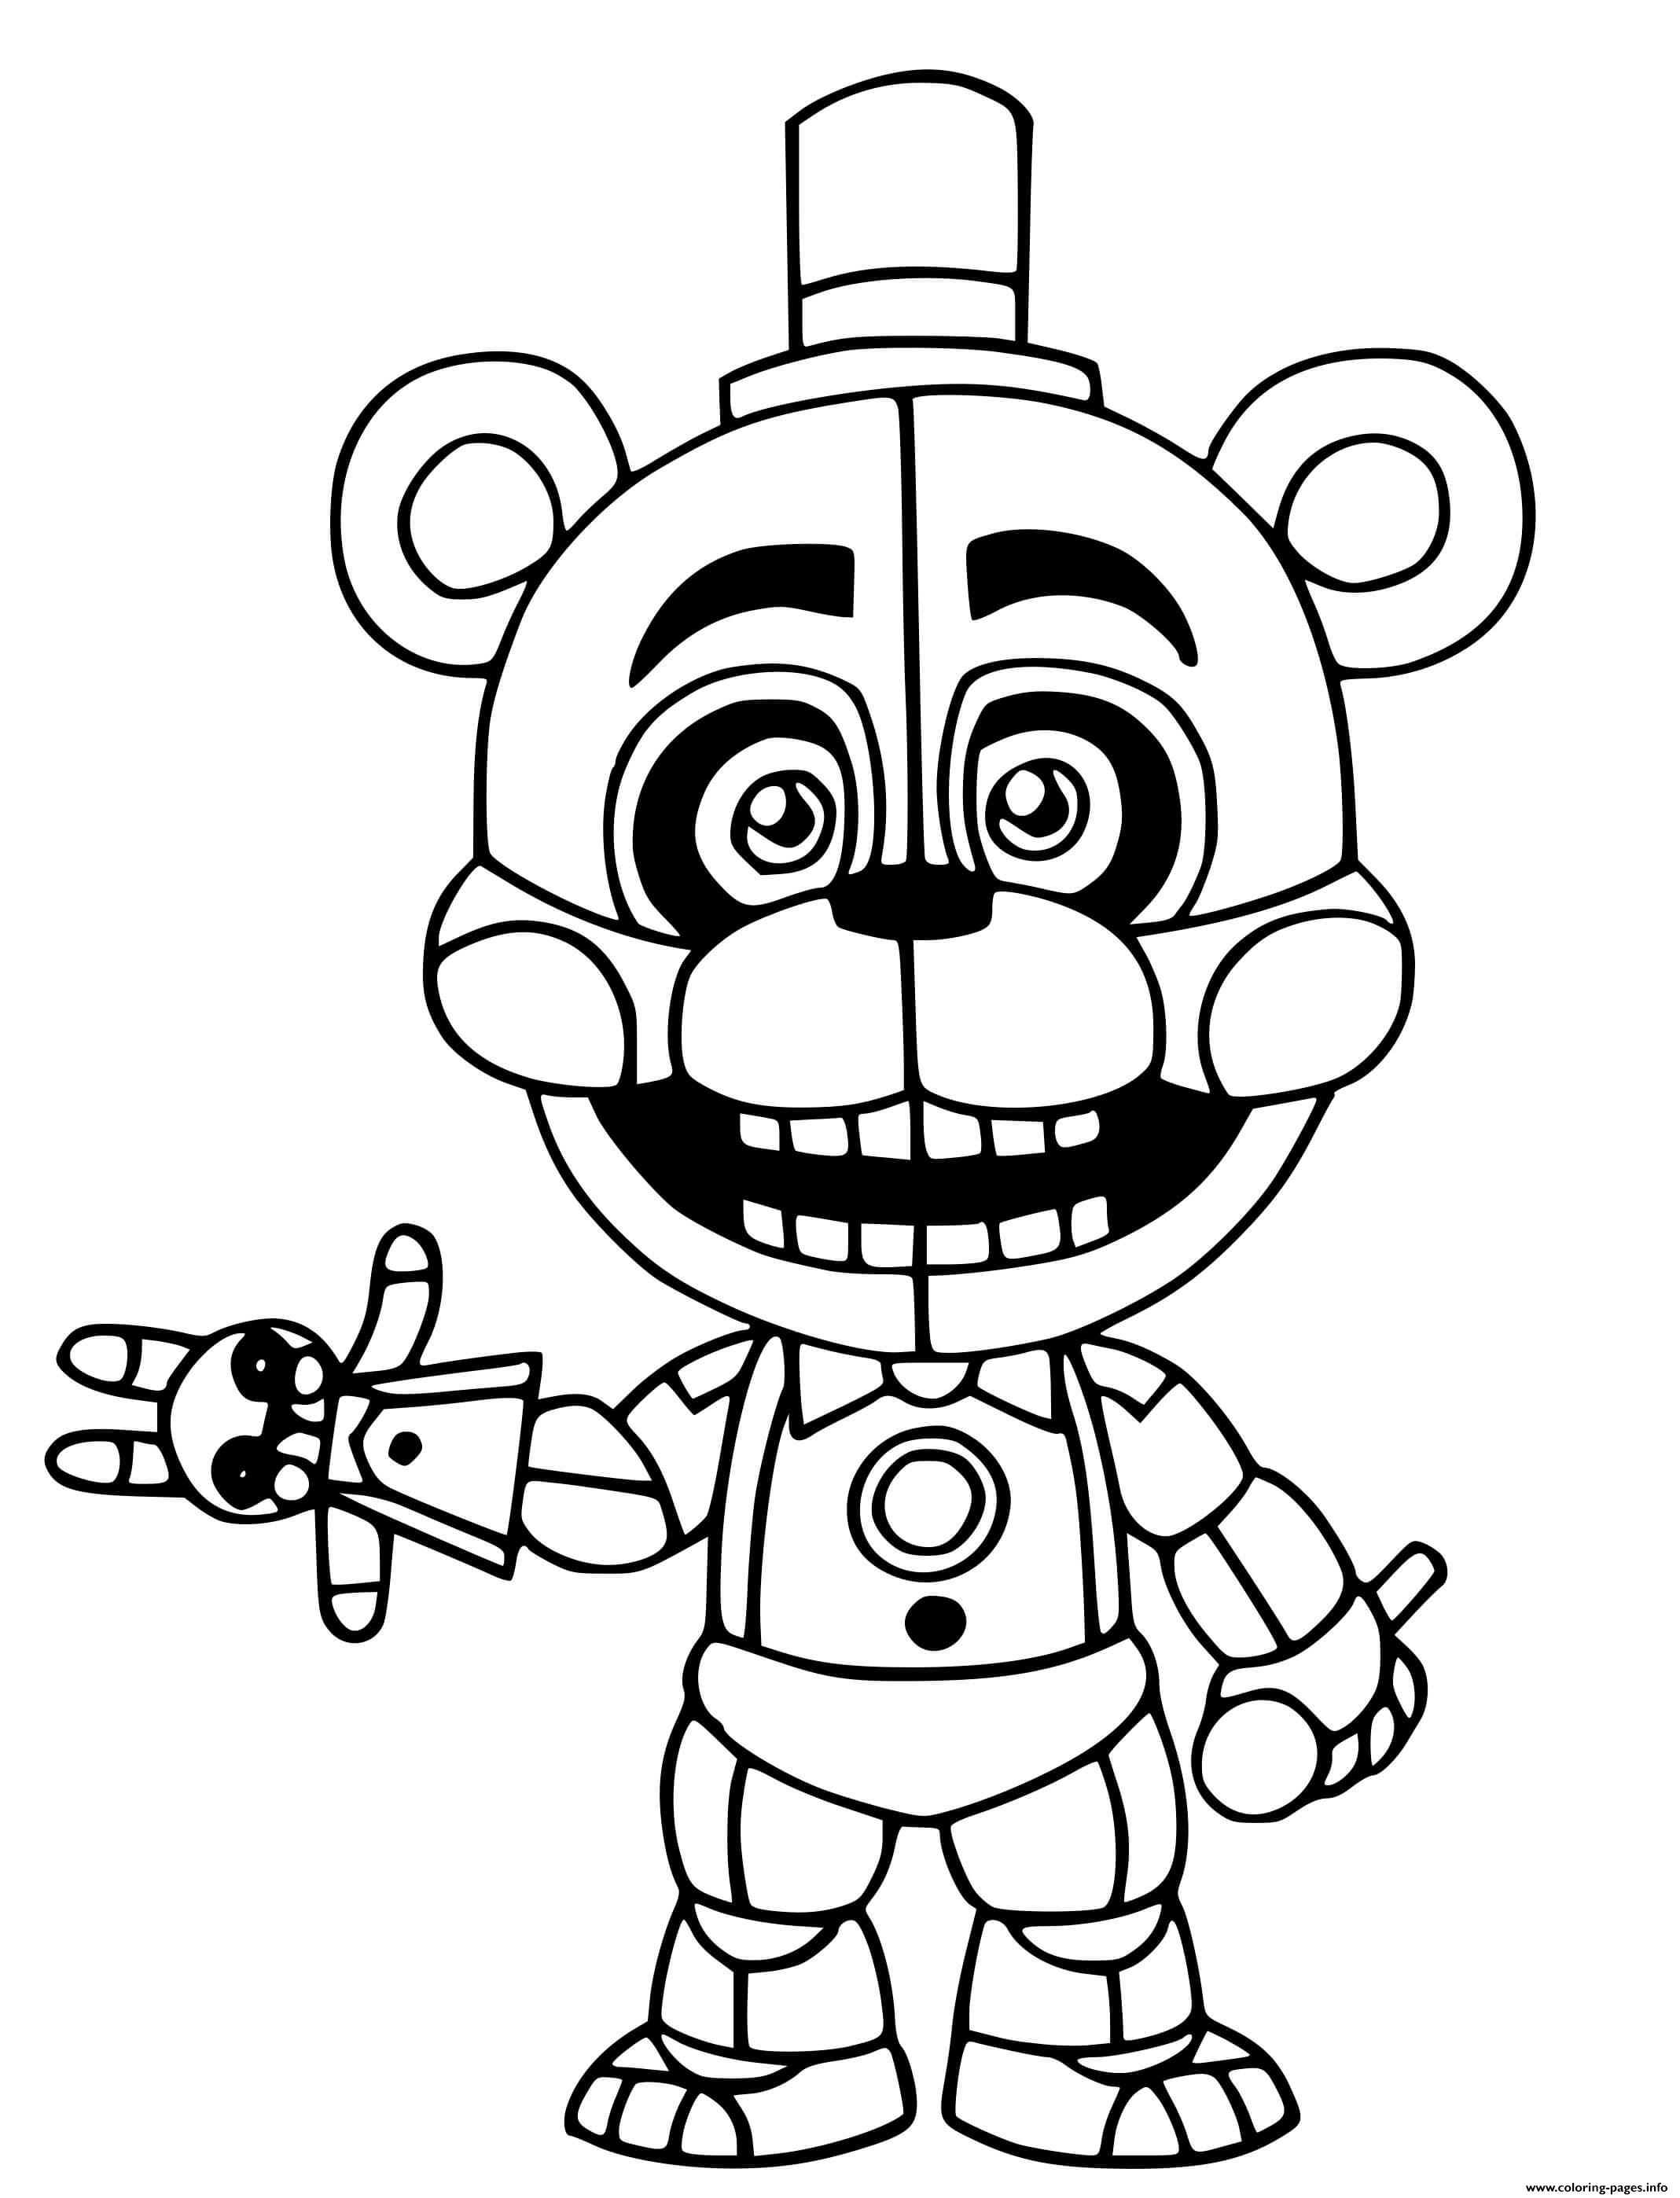 fnaf-toy-bonnie-coloring-pages-learn-how-to-draw-toy-bonnie-from-five